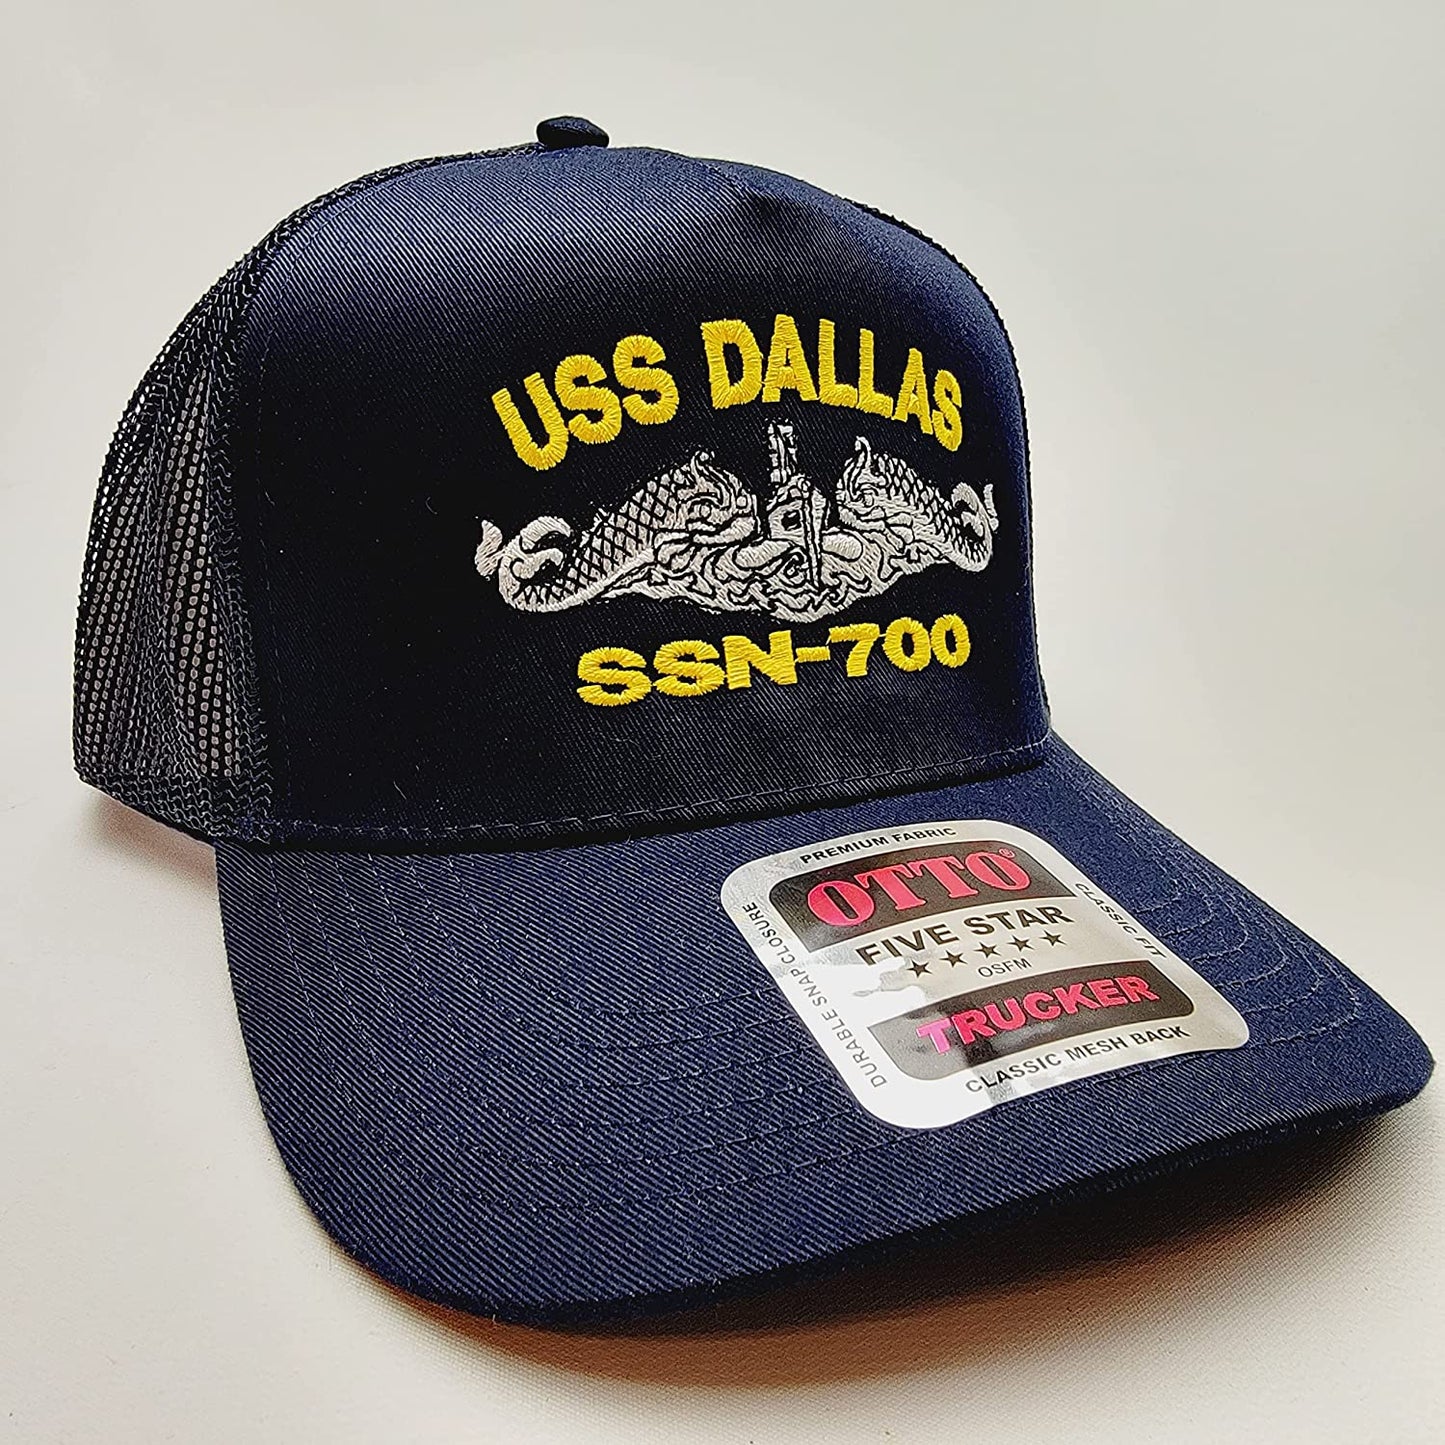 US NAVY USS DALLAS SSN-700 Embroidered Hat Baseball Cap Adjustable Blue